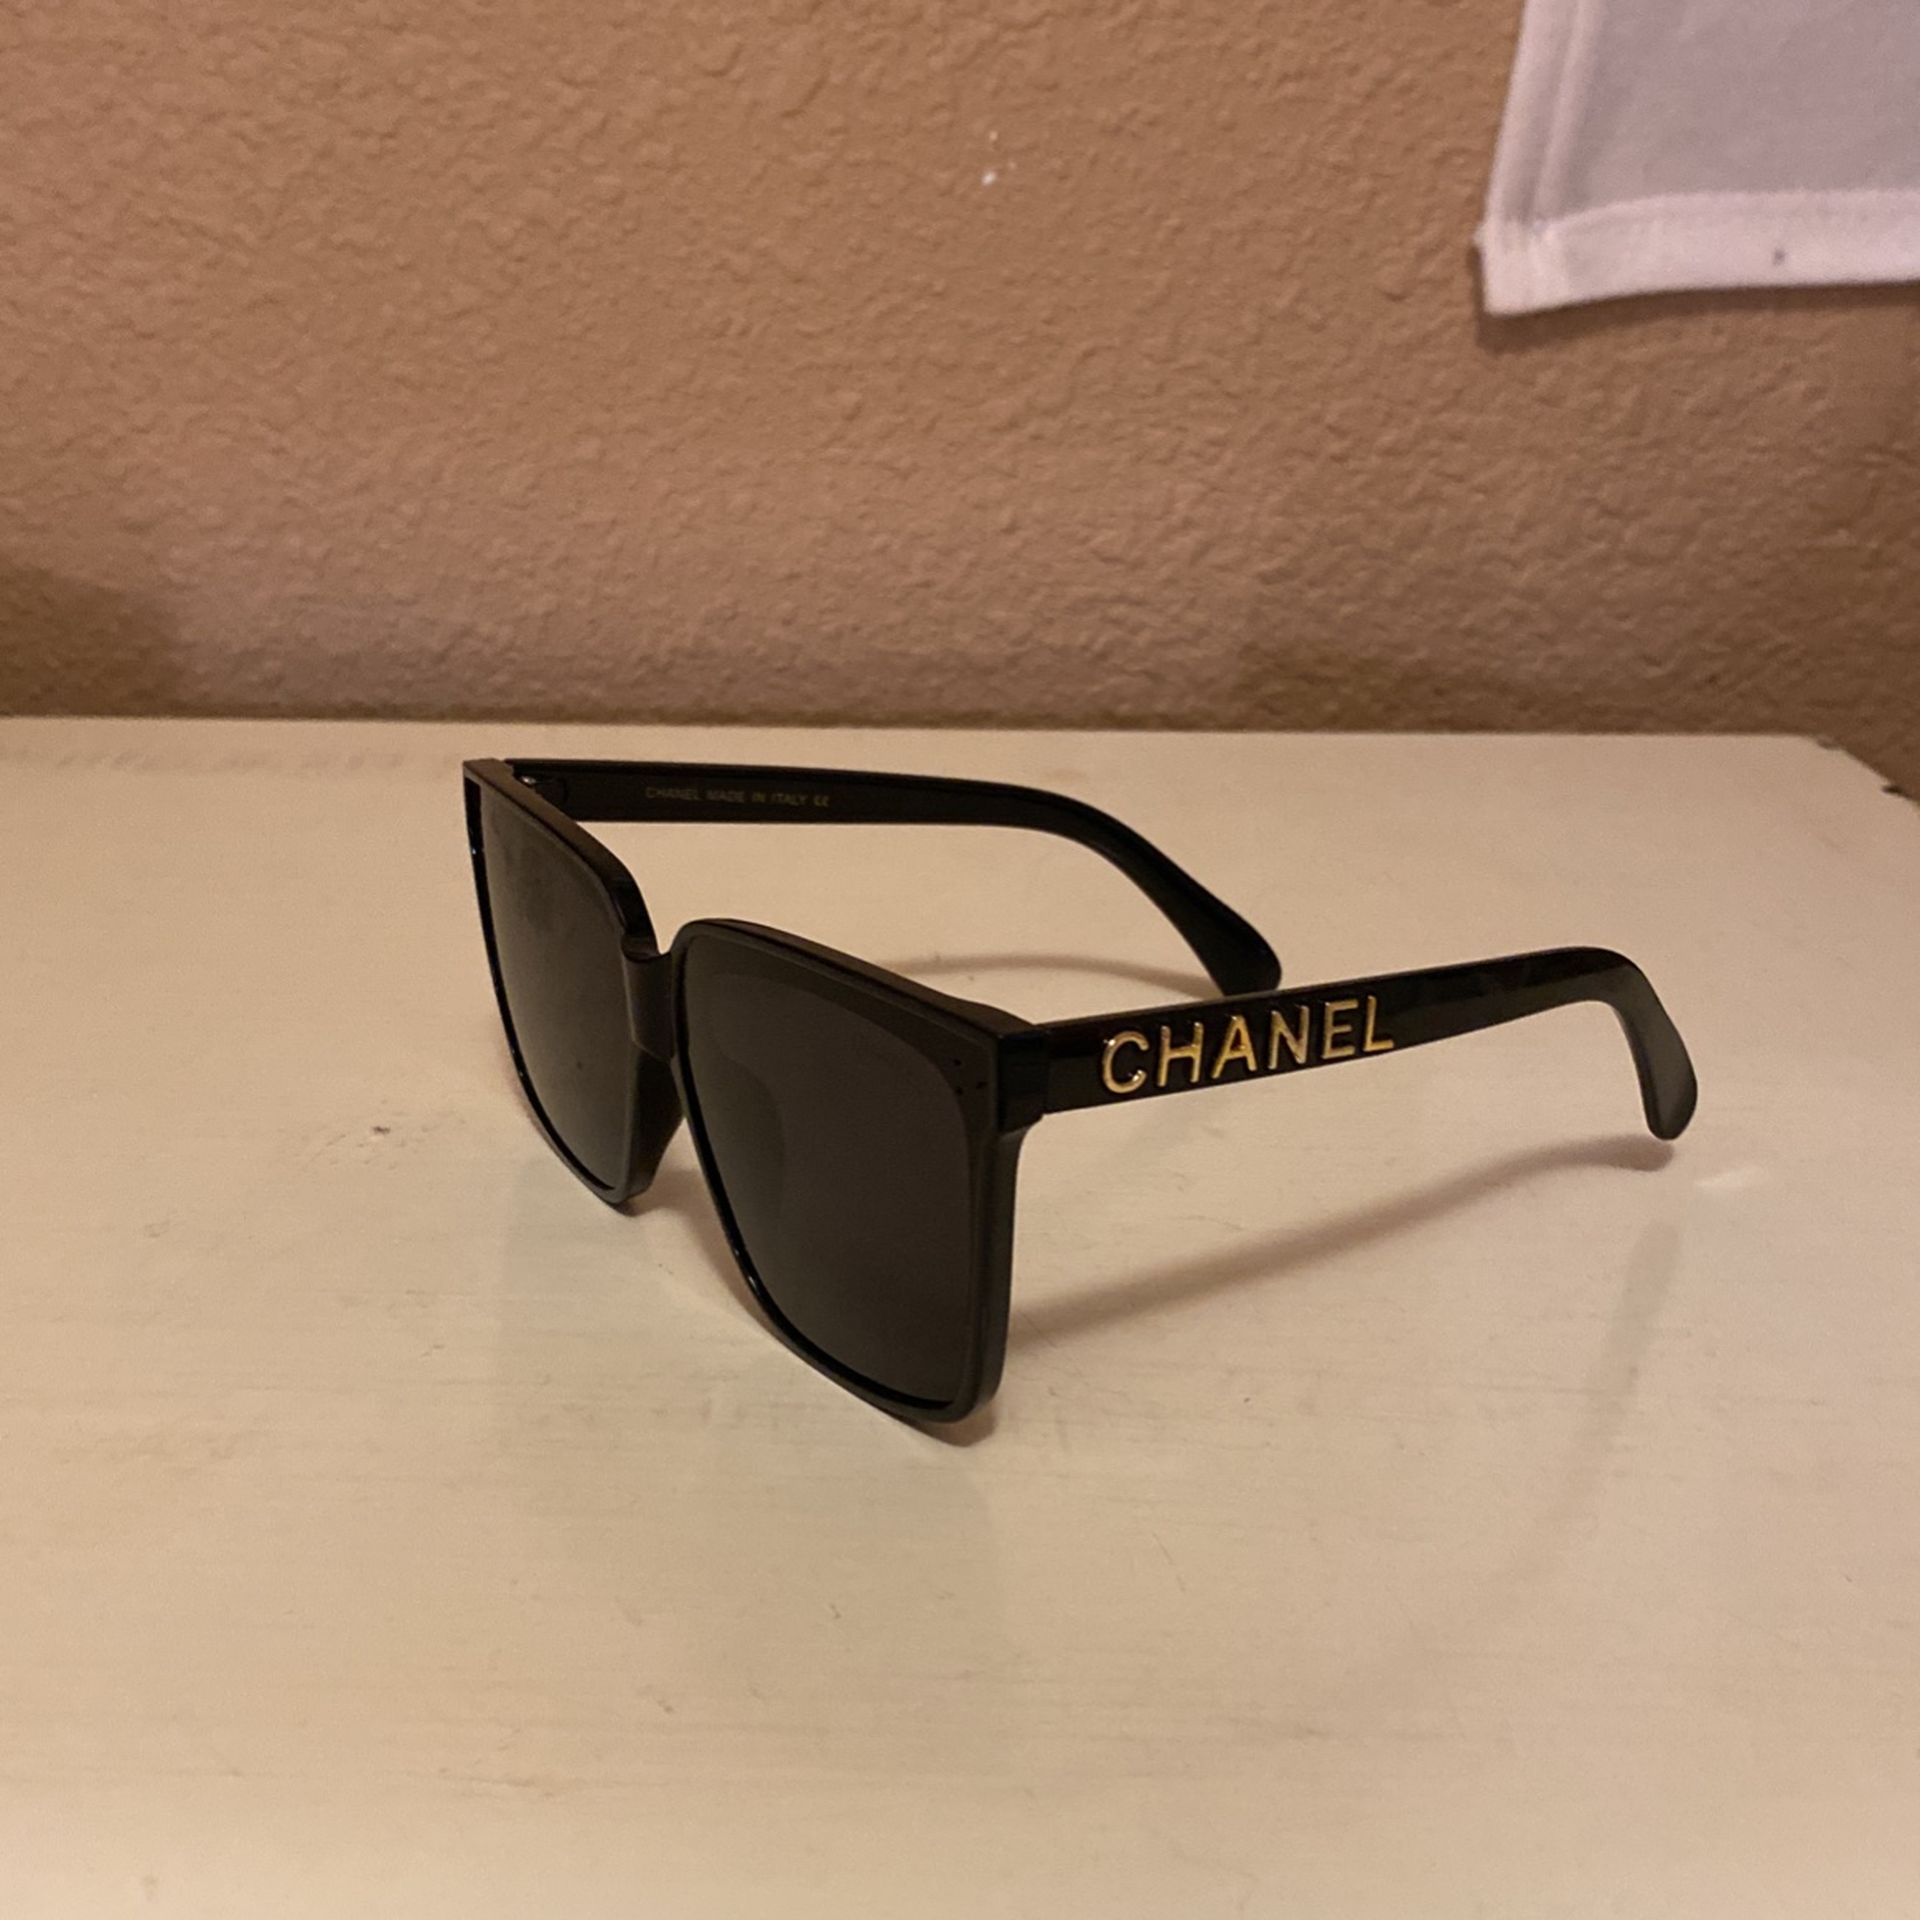 New Black Sunglasses Big Lens $25 Firm C My Page Great Items Ty